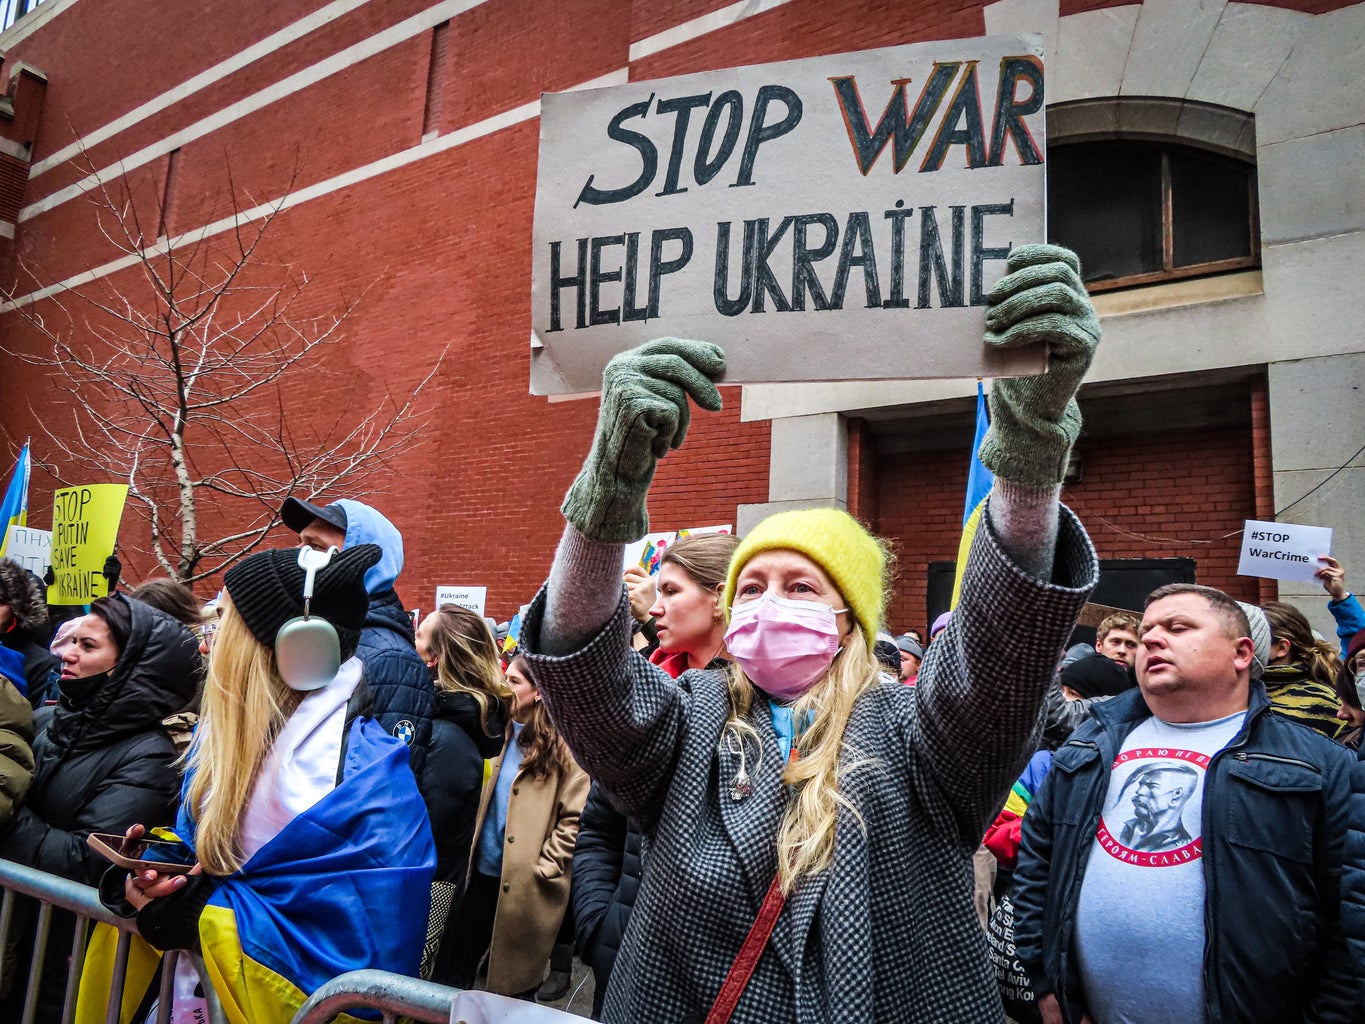 A woman protesting the war against Ukraine